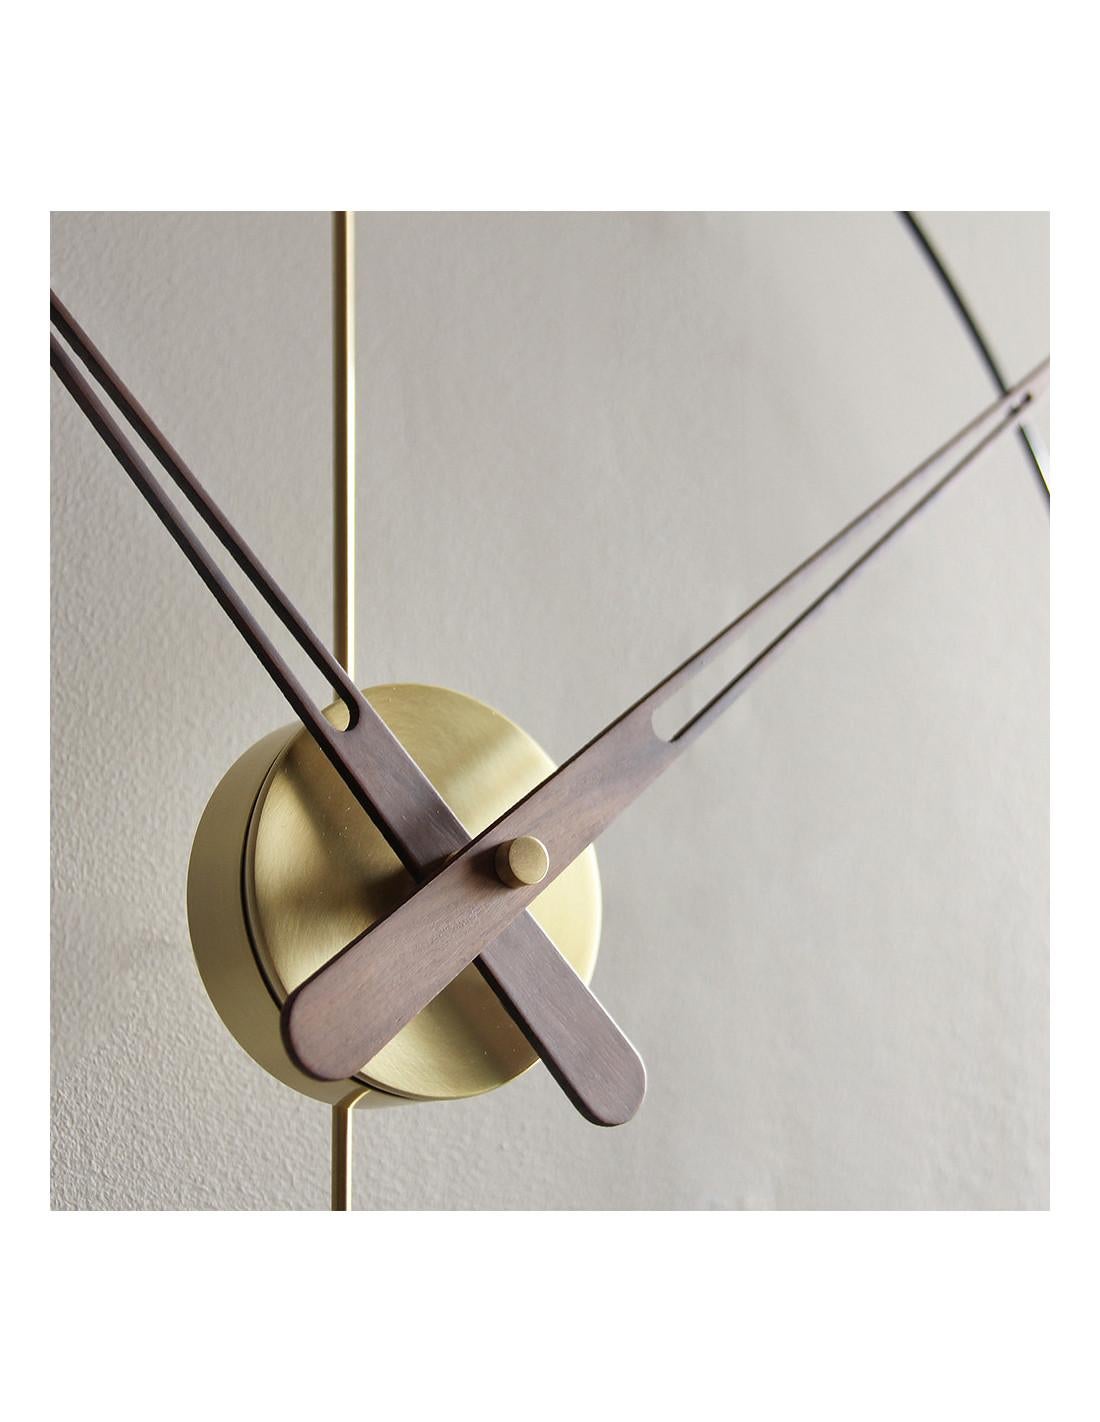 The Mini Bilbao G Clock stands out for its light circle that gives it the fine shape of the accessory. The use of fine and delicate lines allows a simple and minimalist design that doesn't recharge the view. 
Mini Bilbao G wall clock : Black